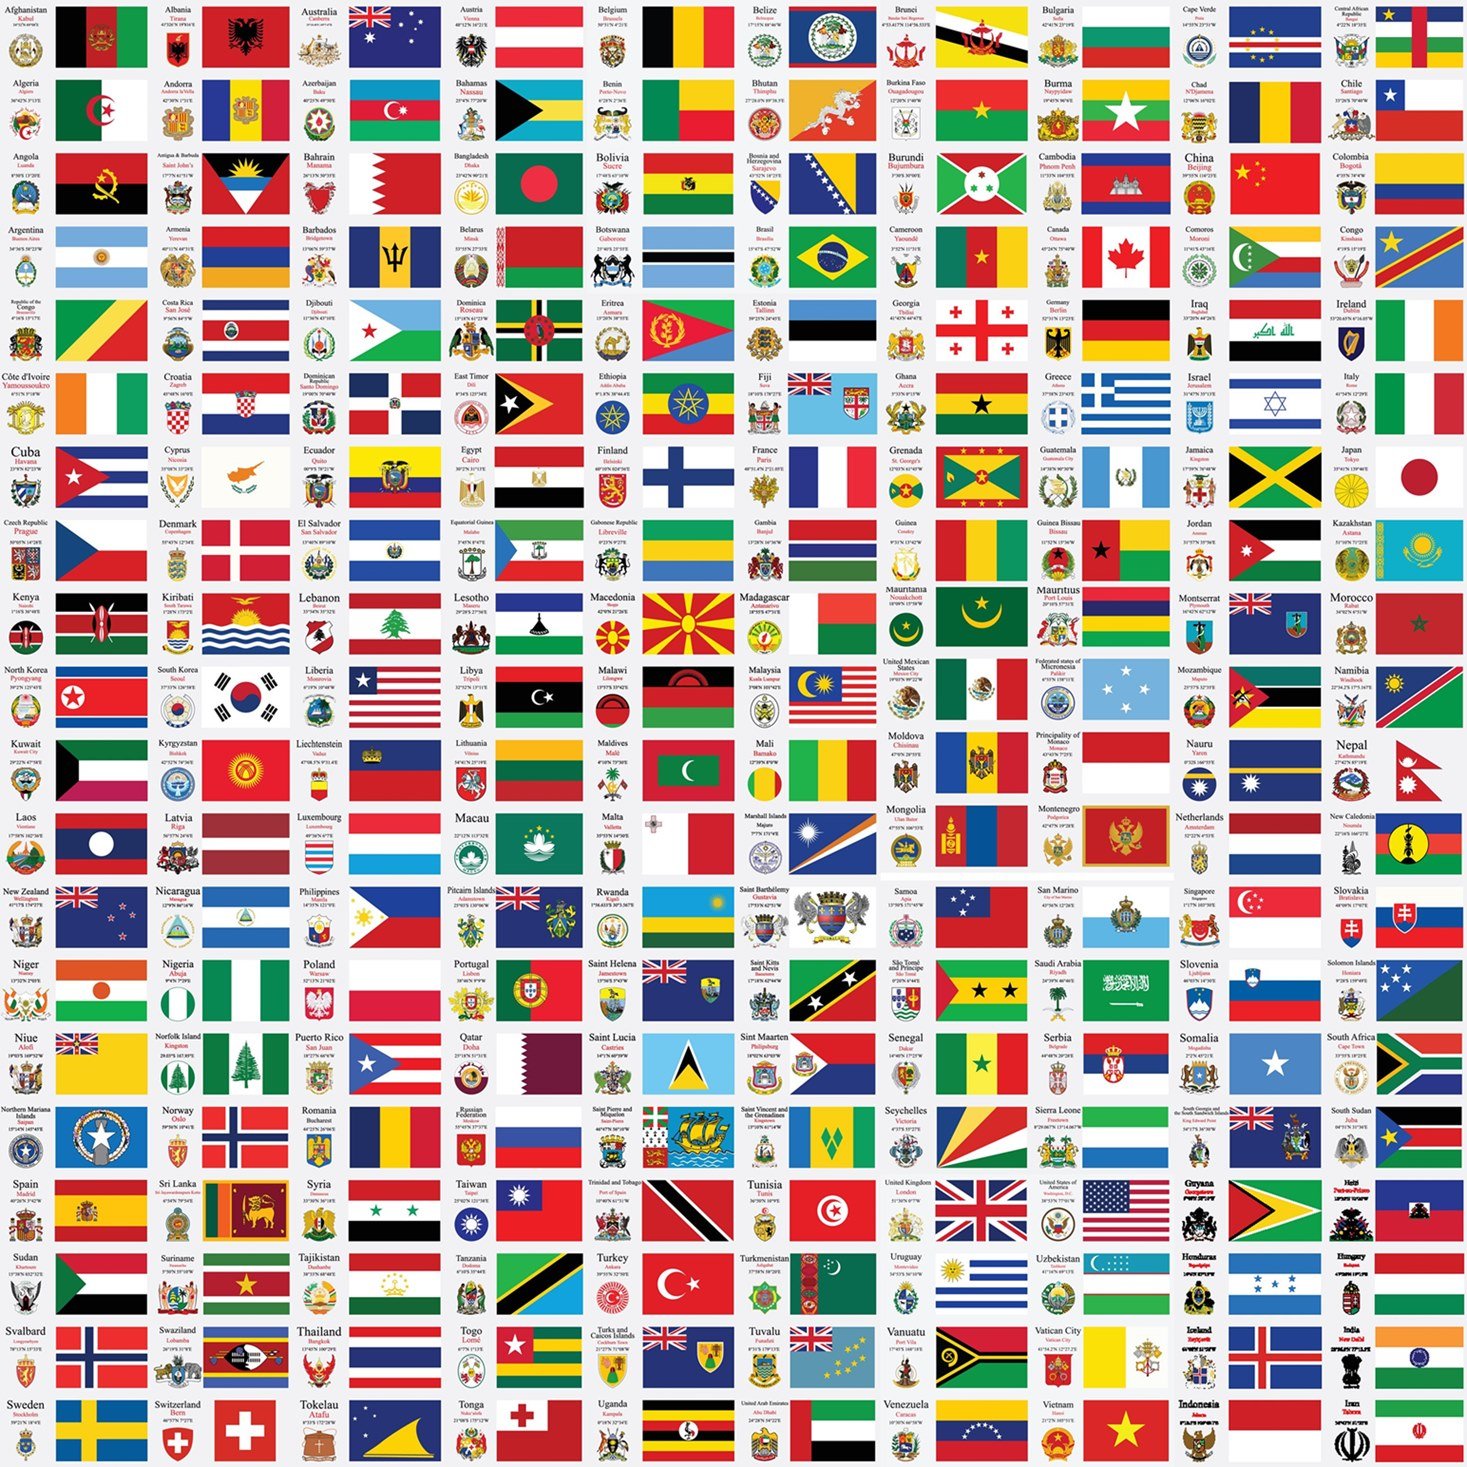 Vector Images Of Symbols And Maps Of Countries Of The World - SoftArchive